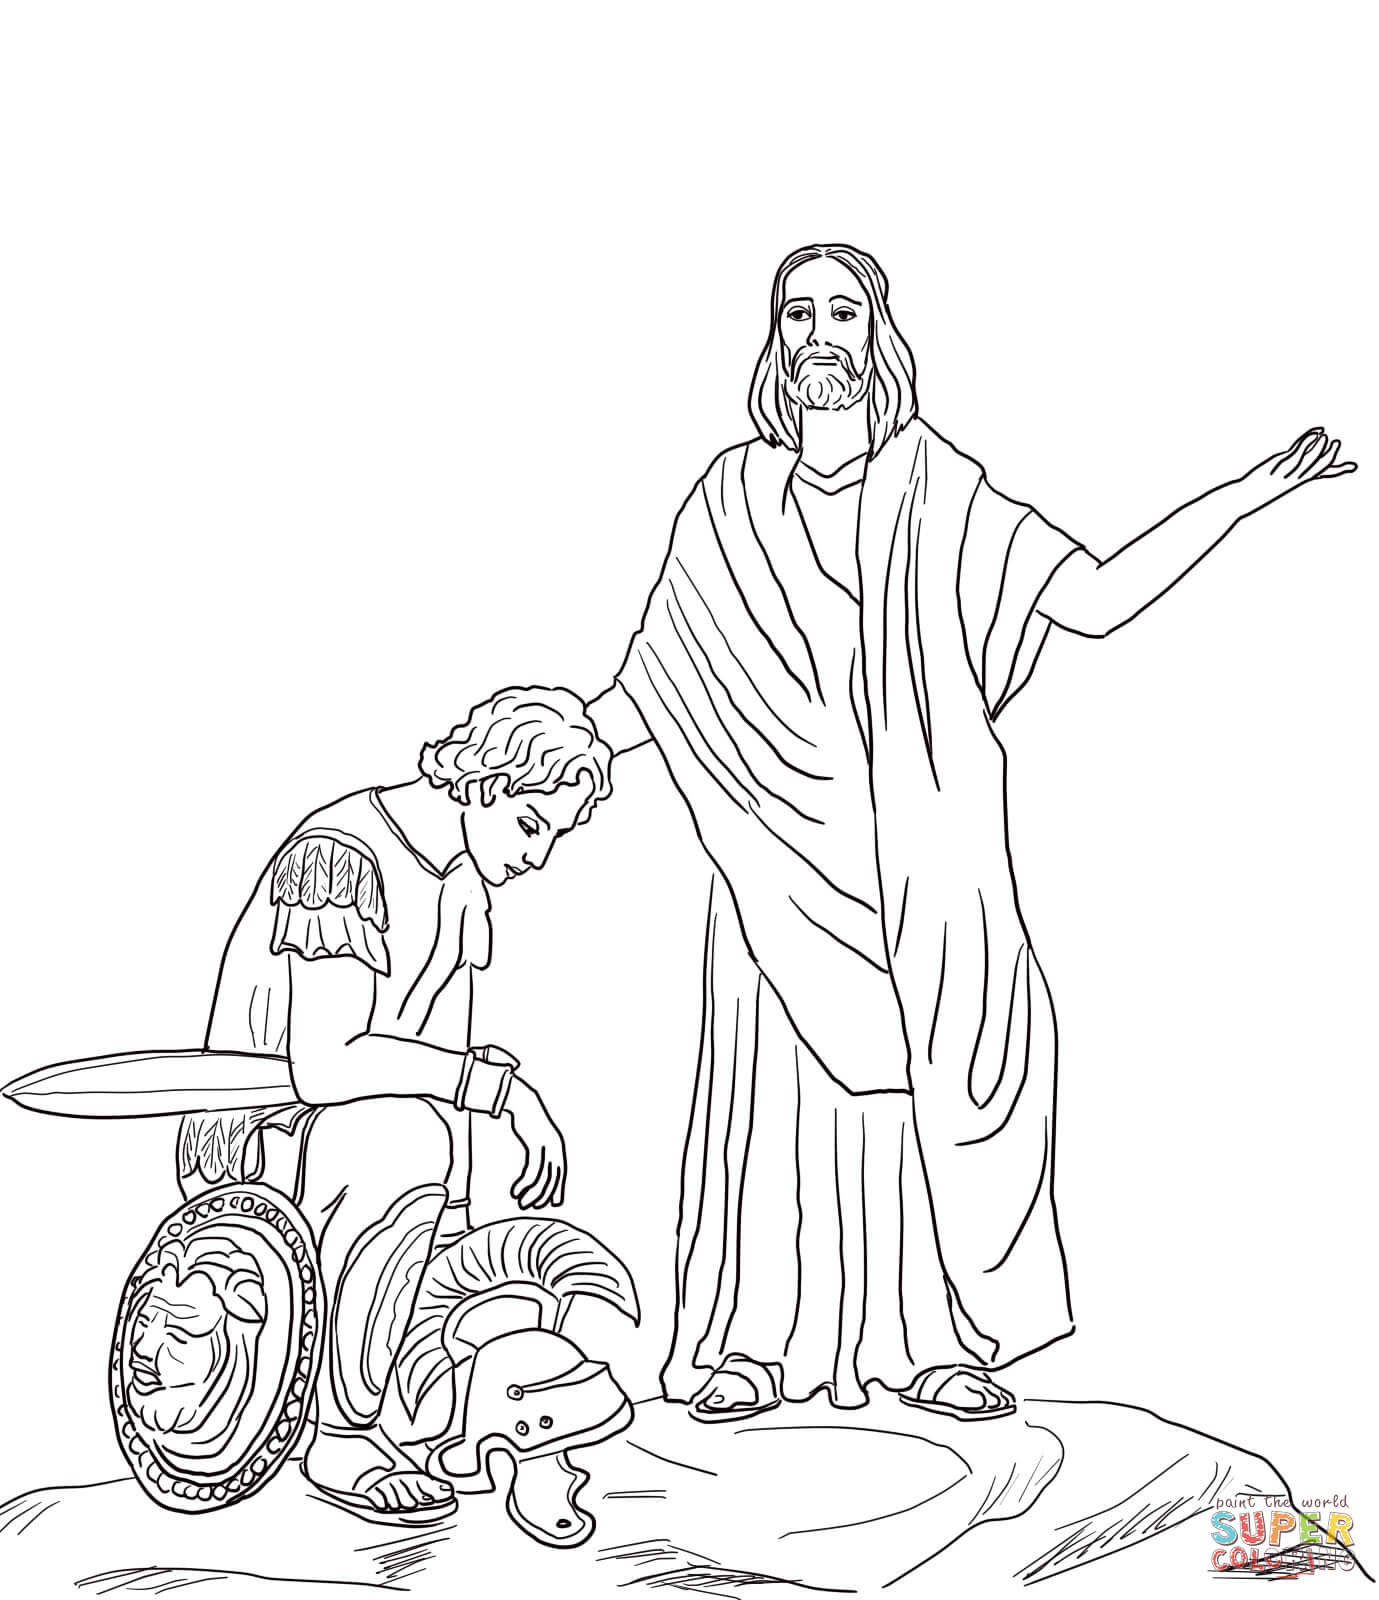 You Might Also Be Interested In Coloring Pages From